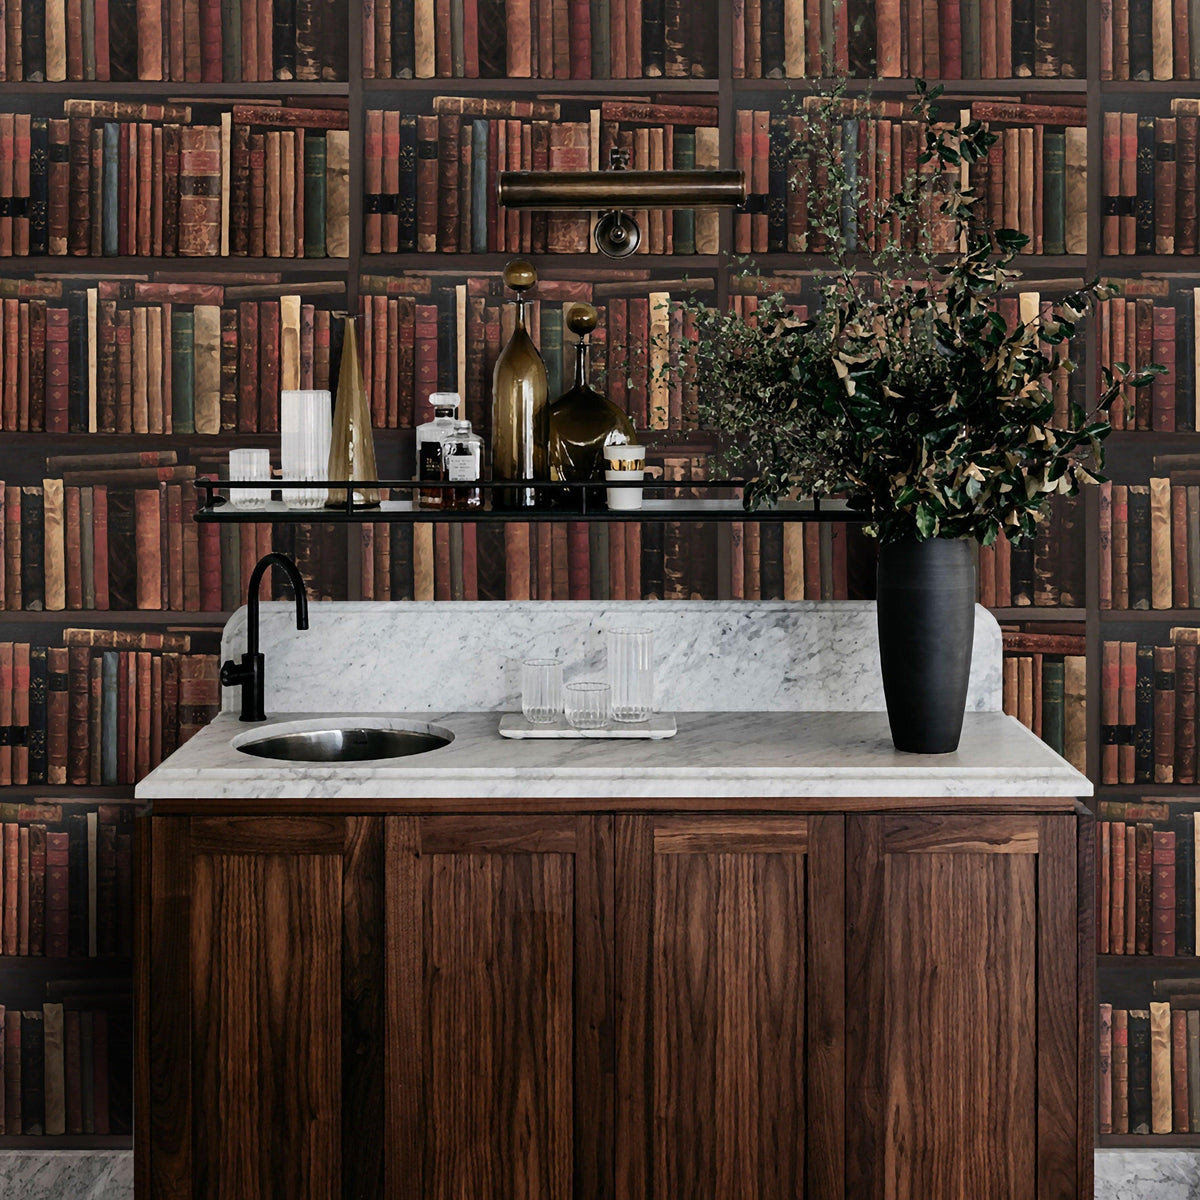 Vintage Library Wallpaper - Wallpaper Collection